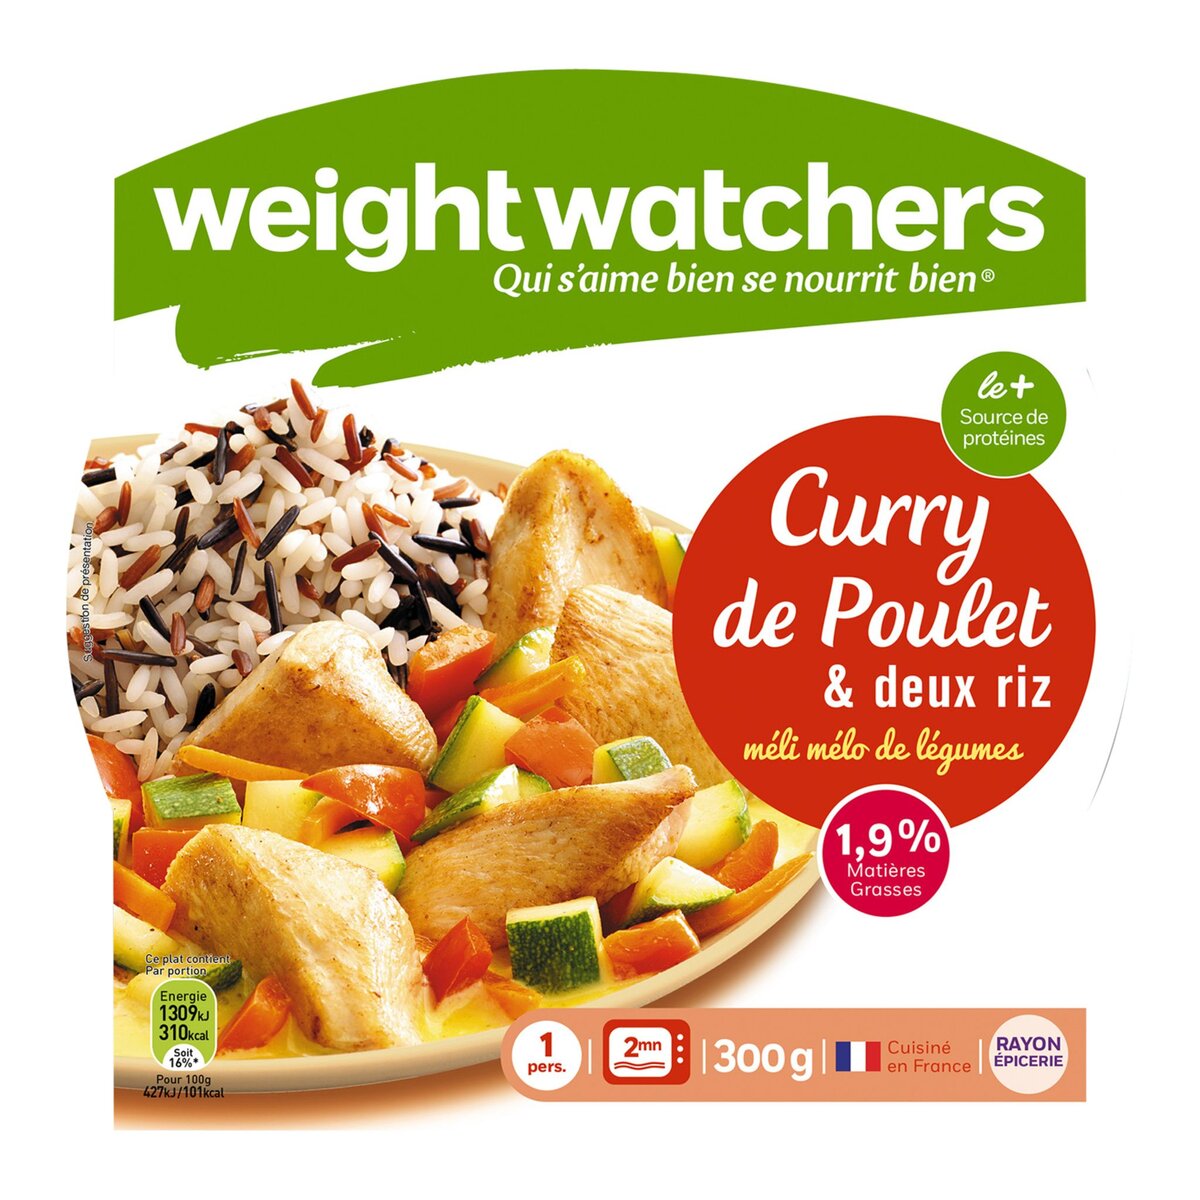 WEIGHT WATCHERS Weight Watchers poulet curry riz légumes micro